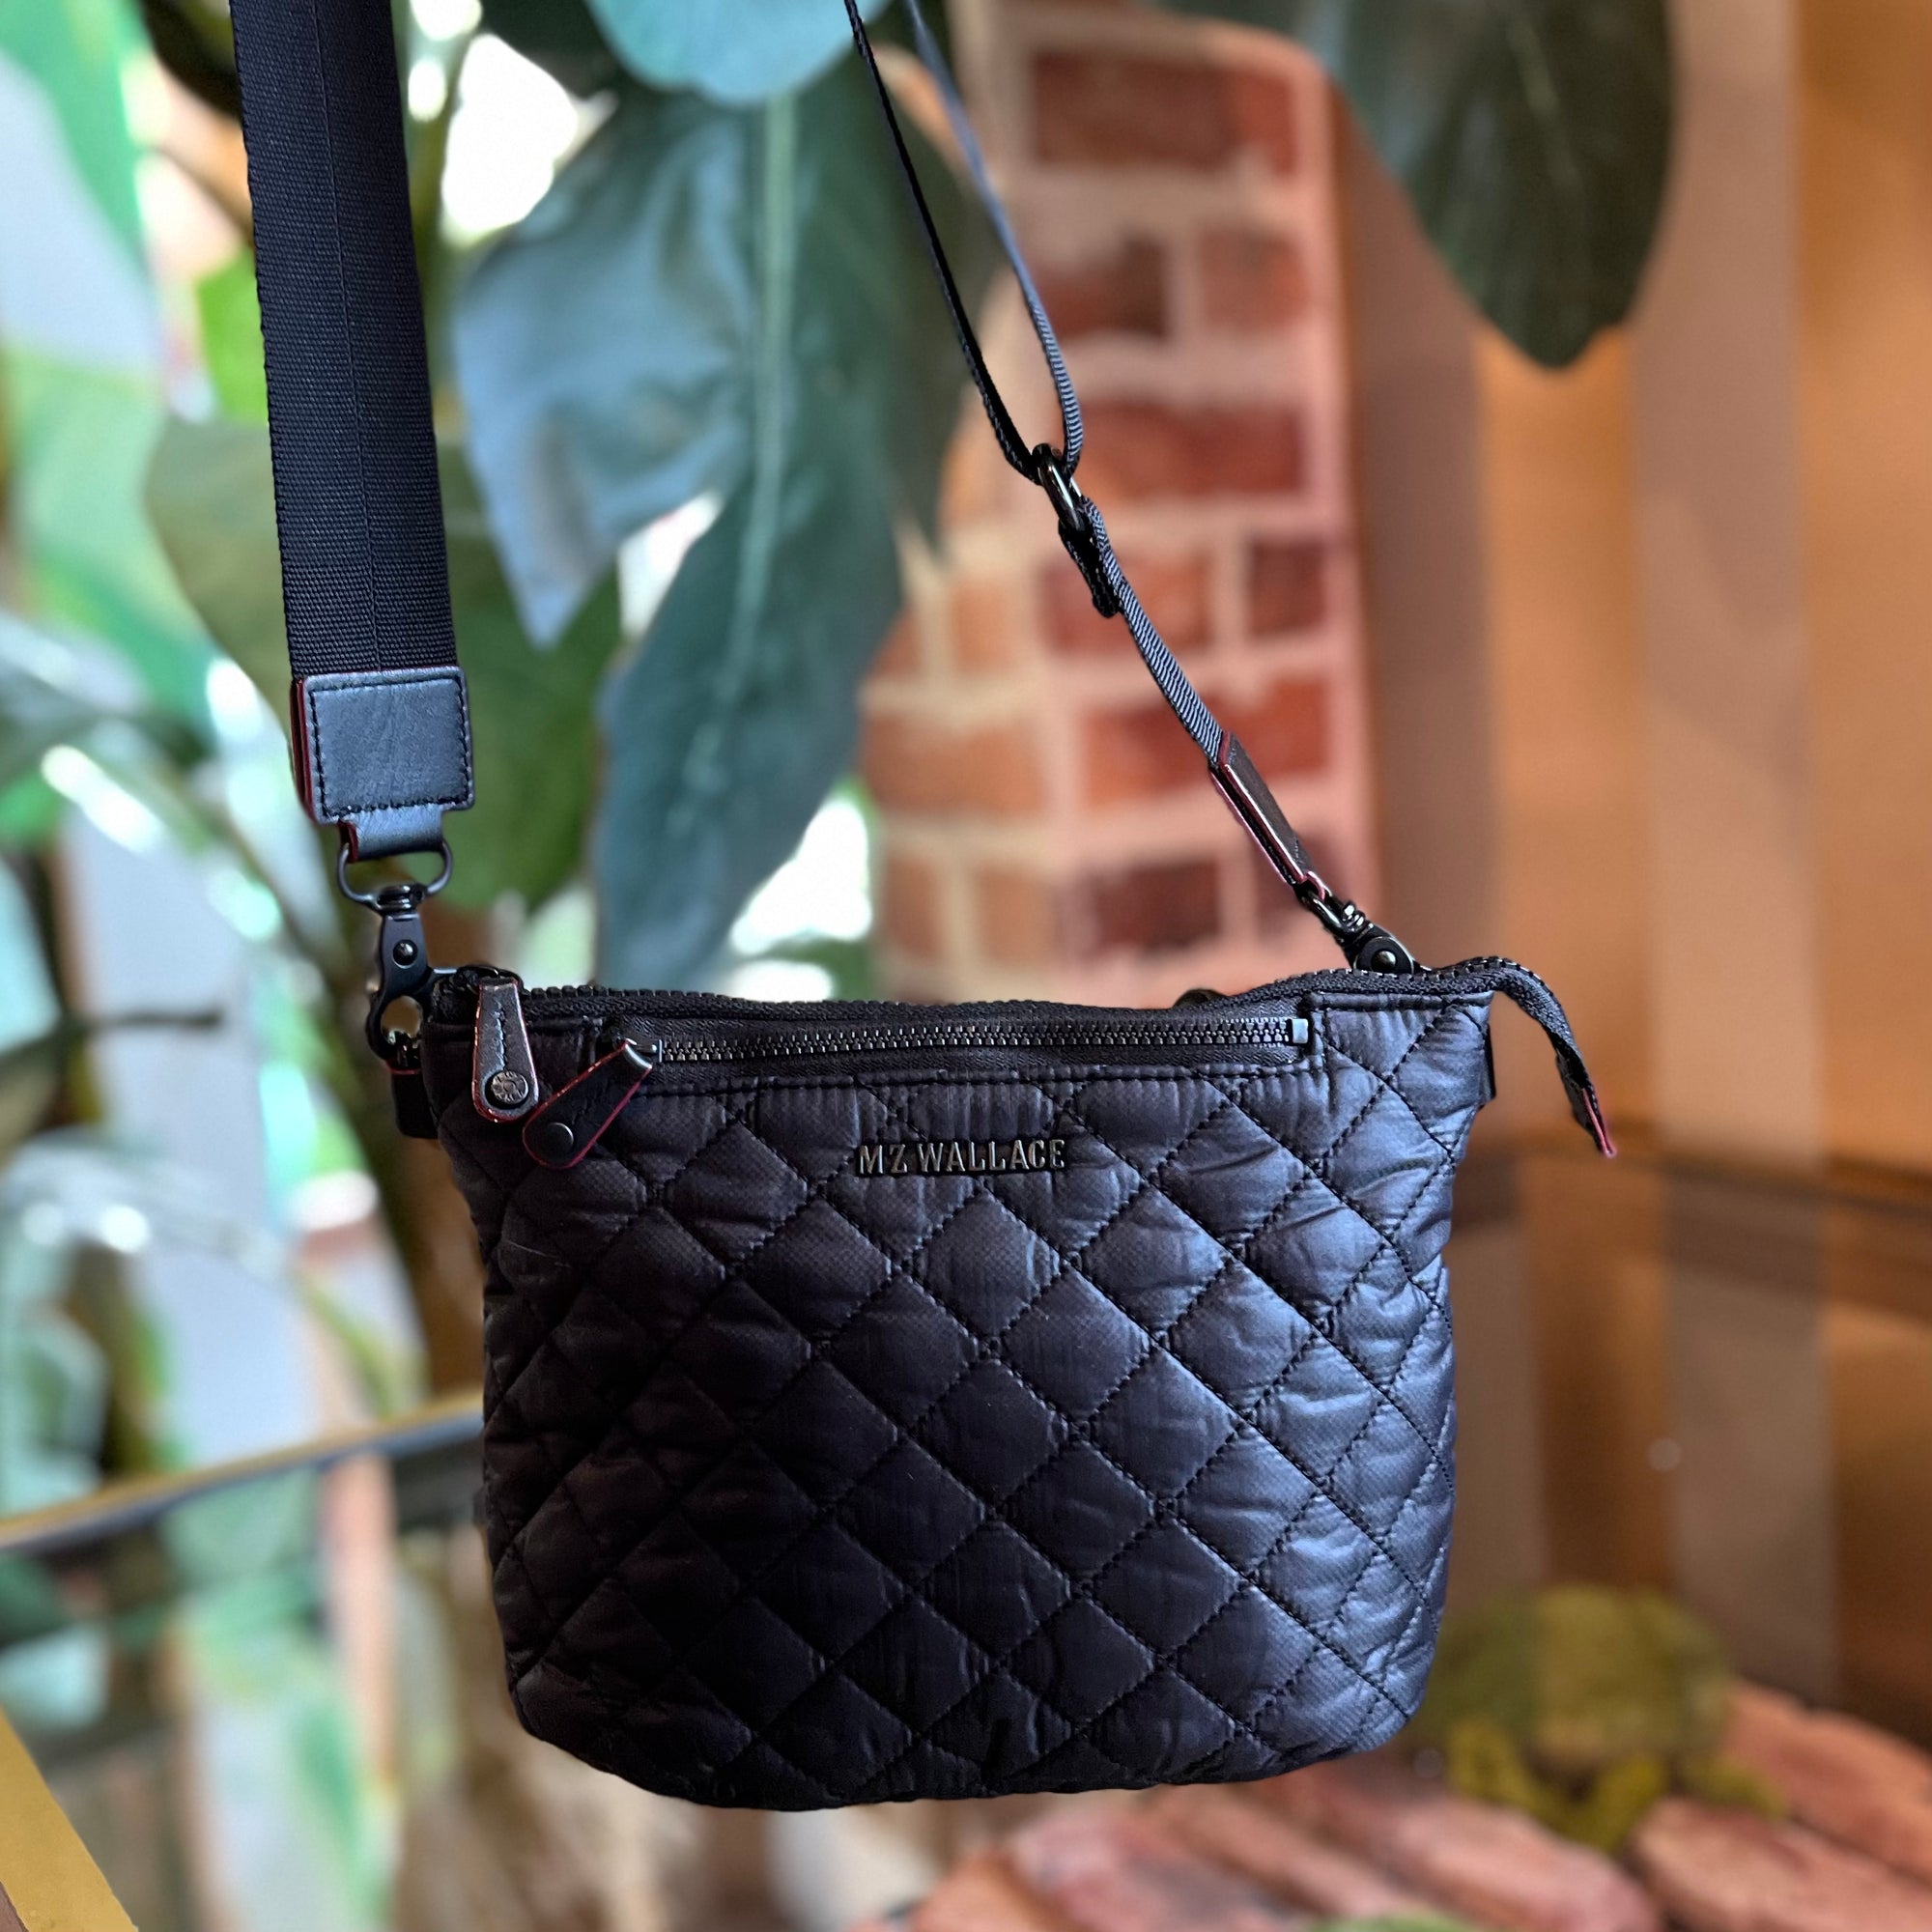 Metro Scout Quilted Crossbody Bag in Black